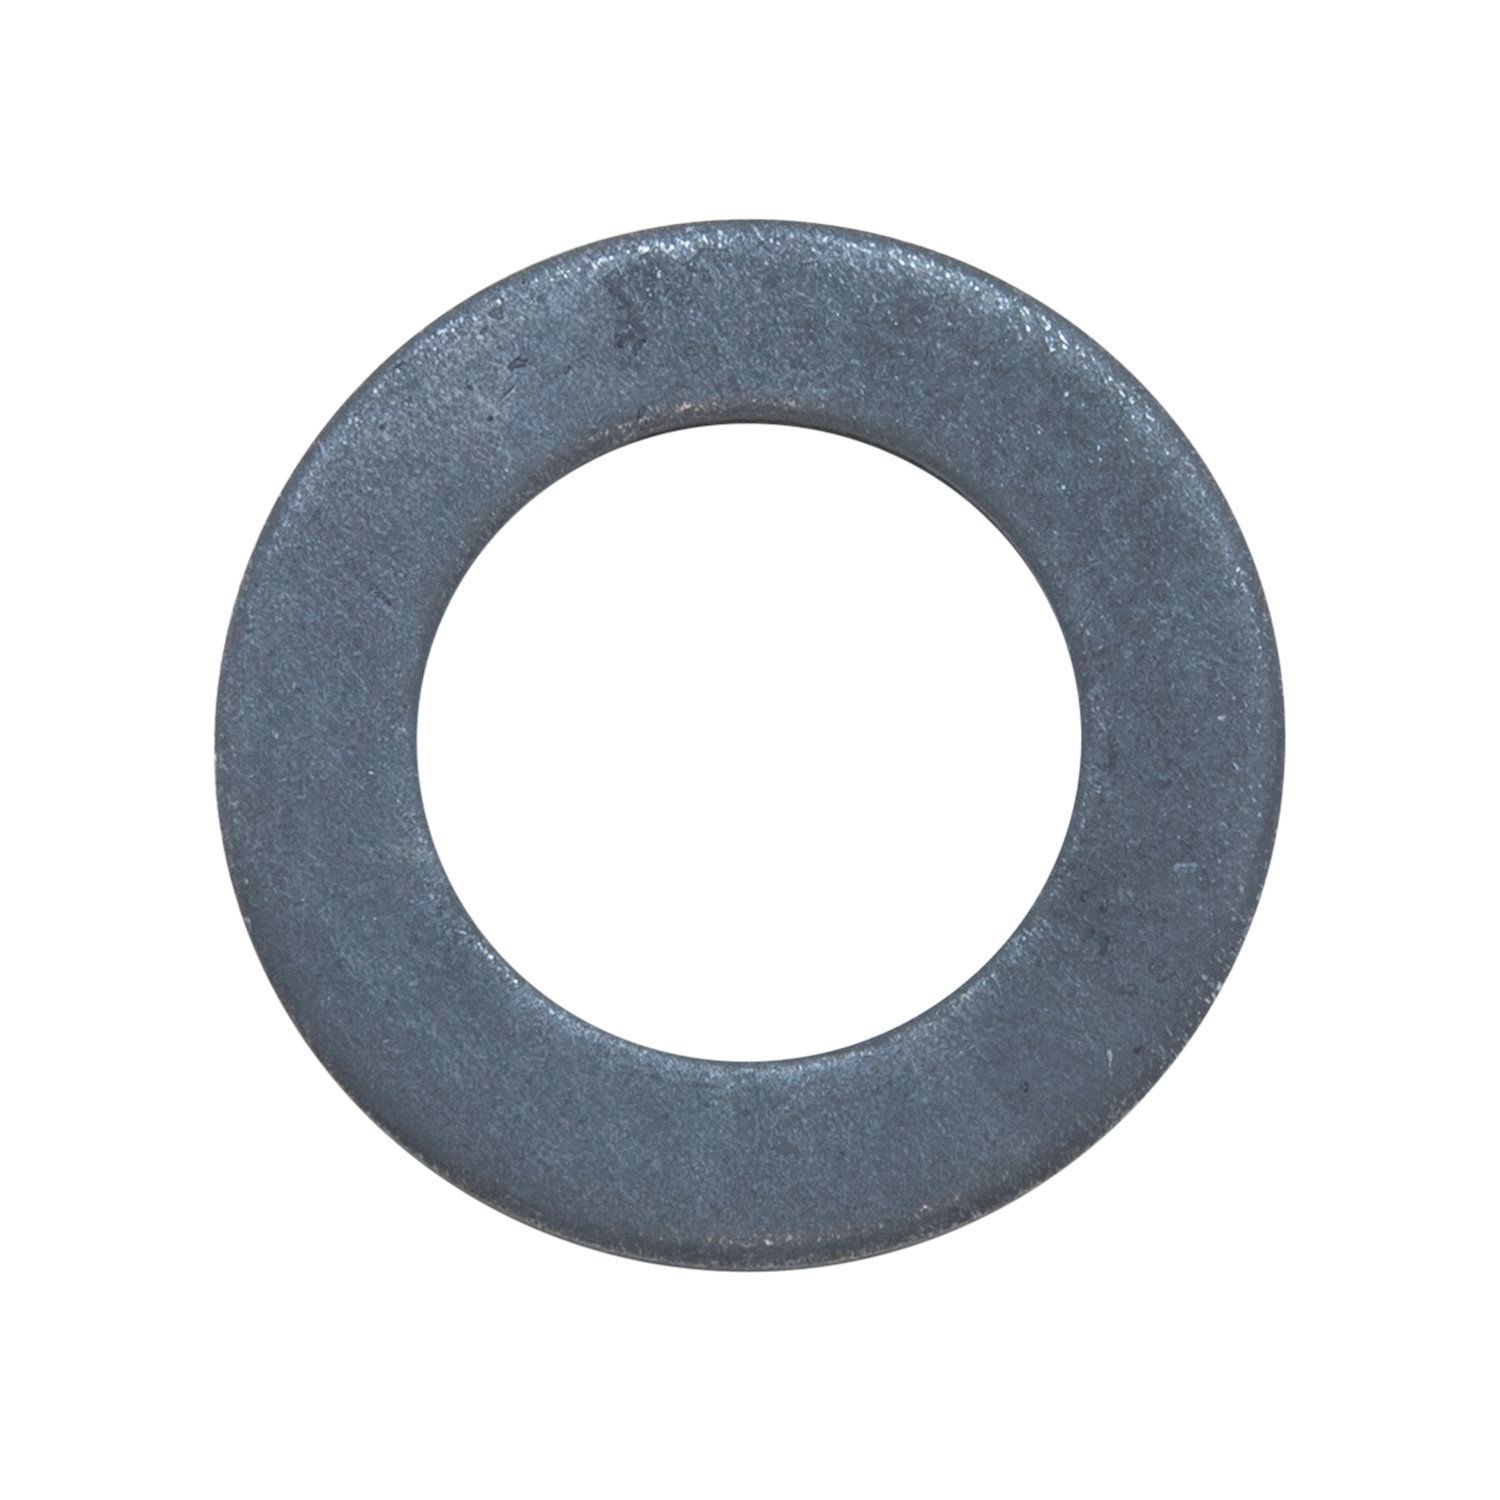 Outer Stub Axle Nut Washer For Dodge Dana 44 & 60